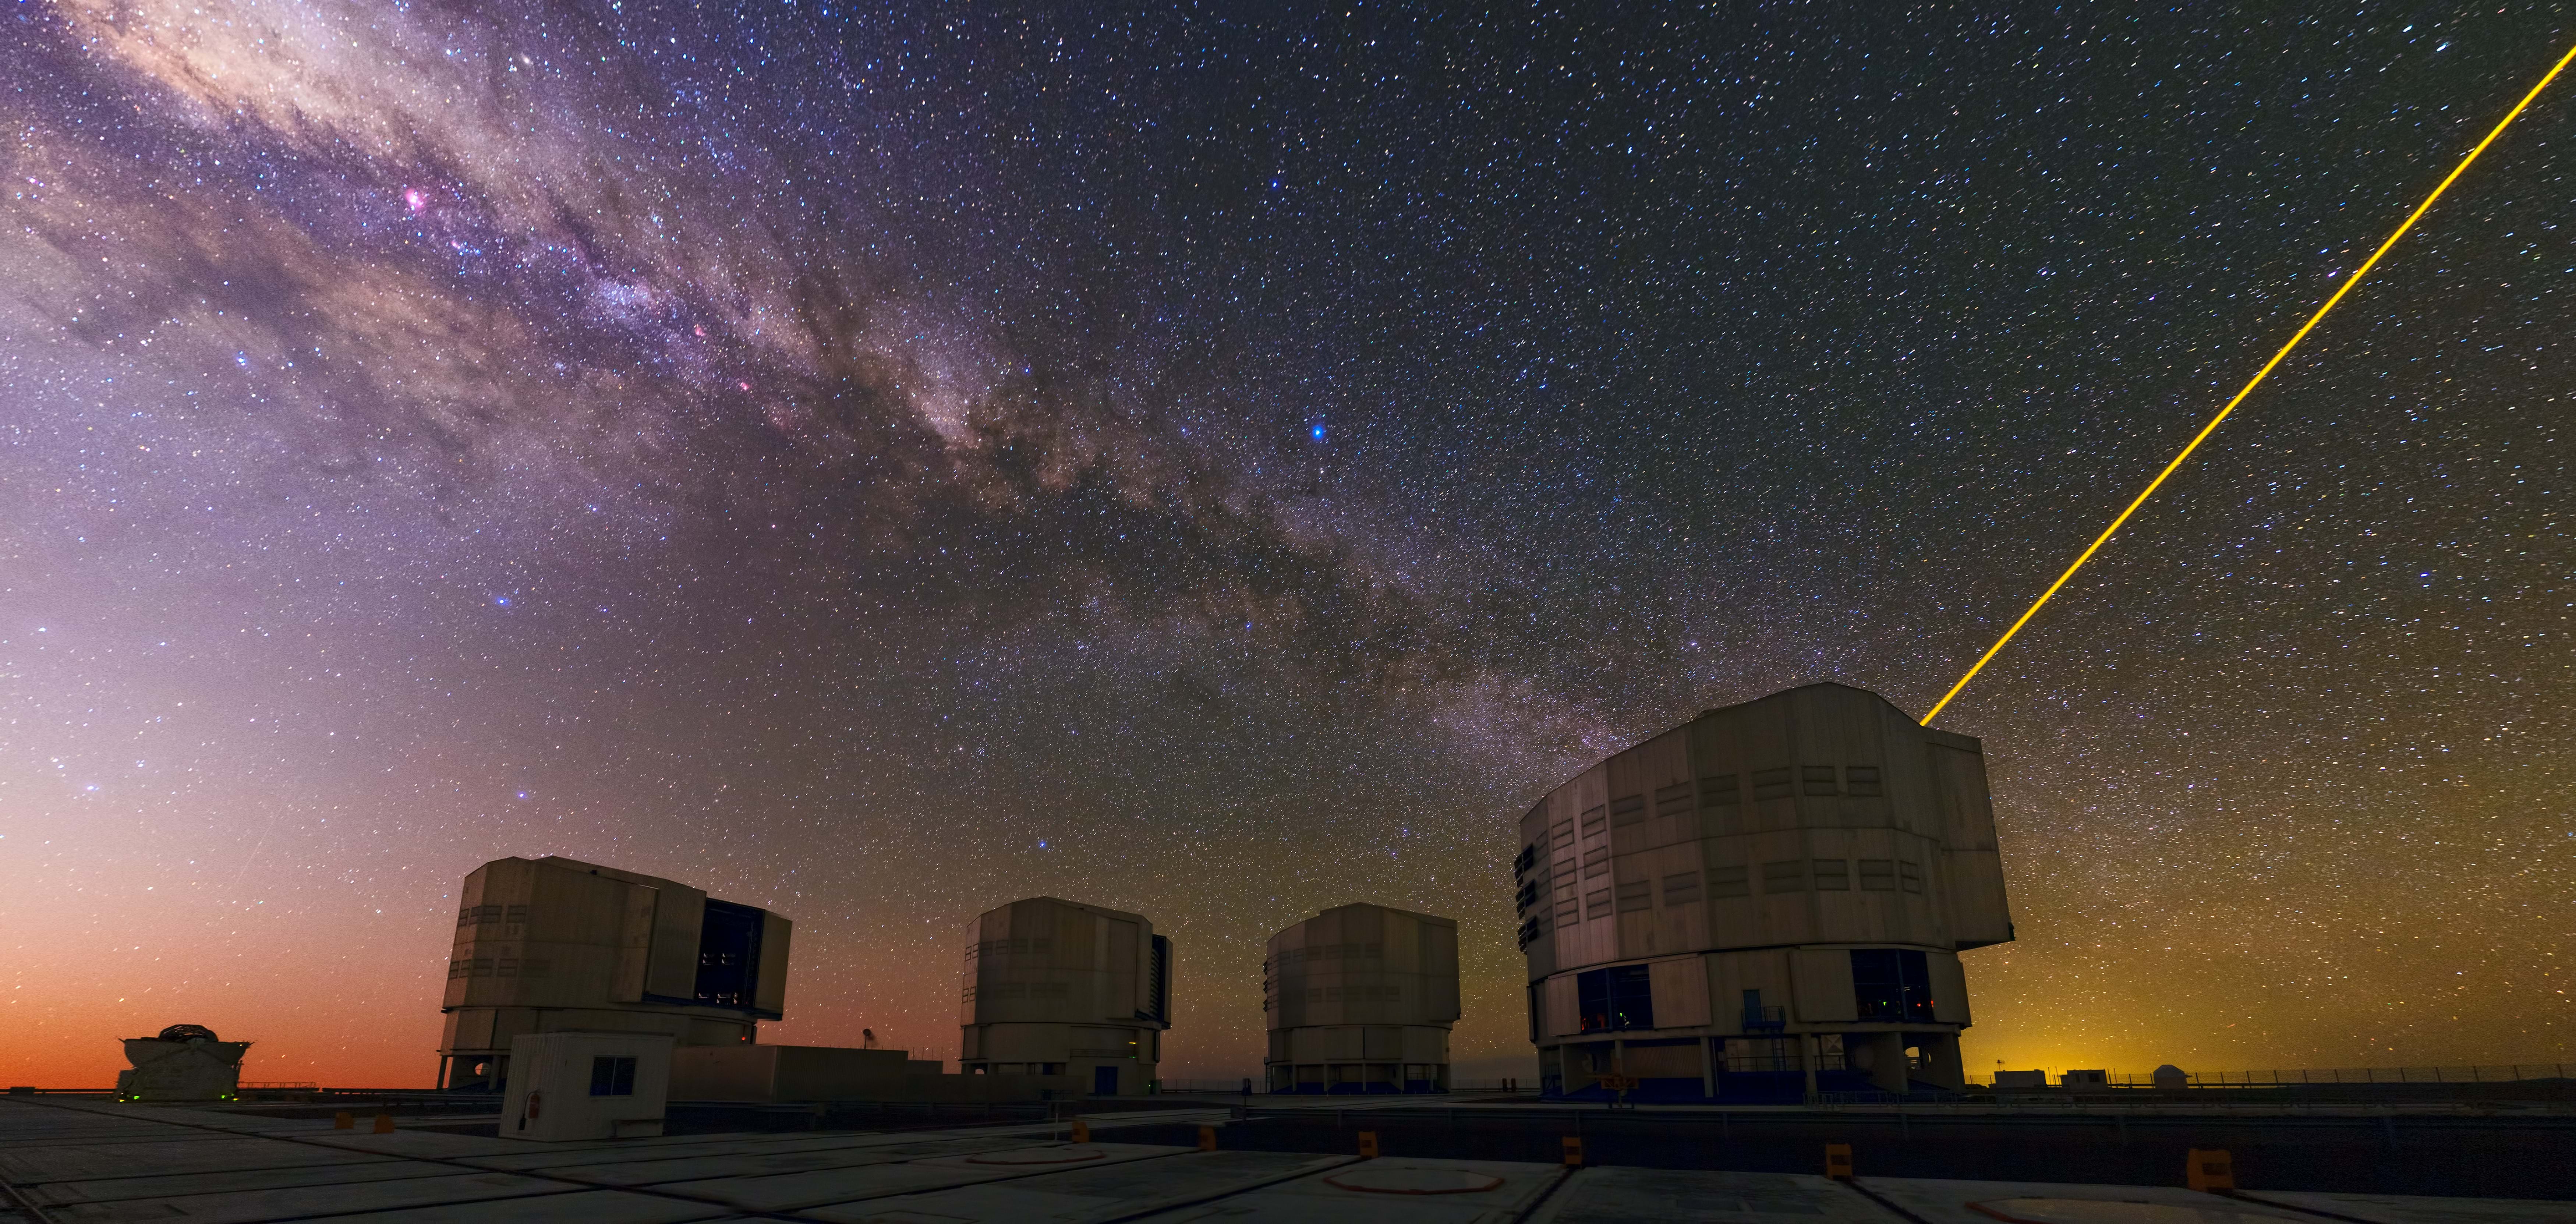 A panorama of ESO’s Very Large Telescope (VLT) atop the platform of Chile’s Cerro Paranal. A mix of colours sweeps across the sky in this image. From the fiery red sunset up to the dusty purple band of the Milky Way.